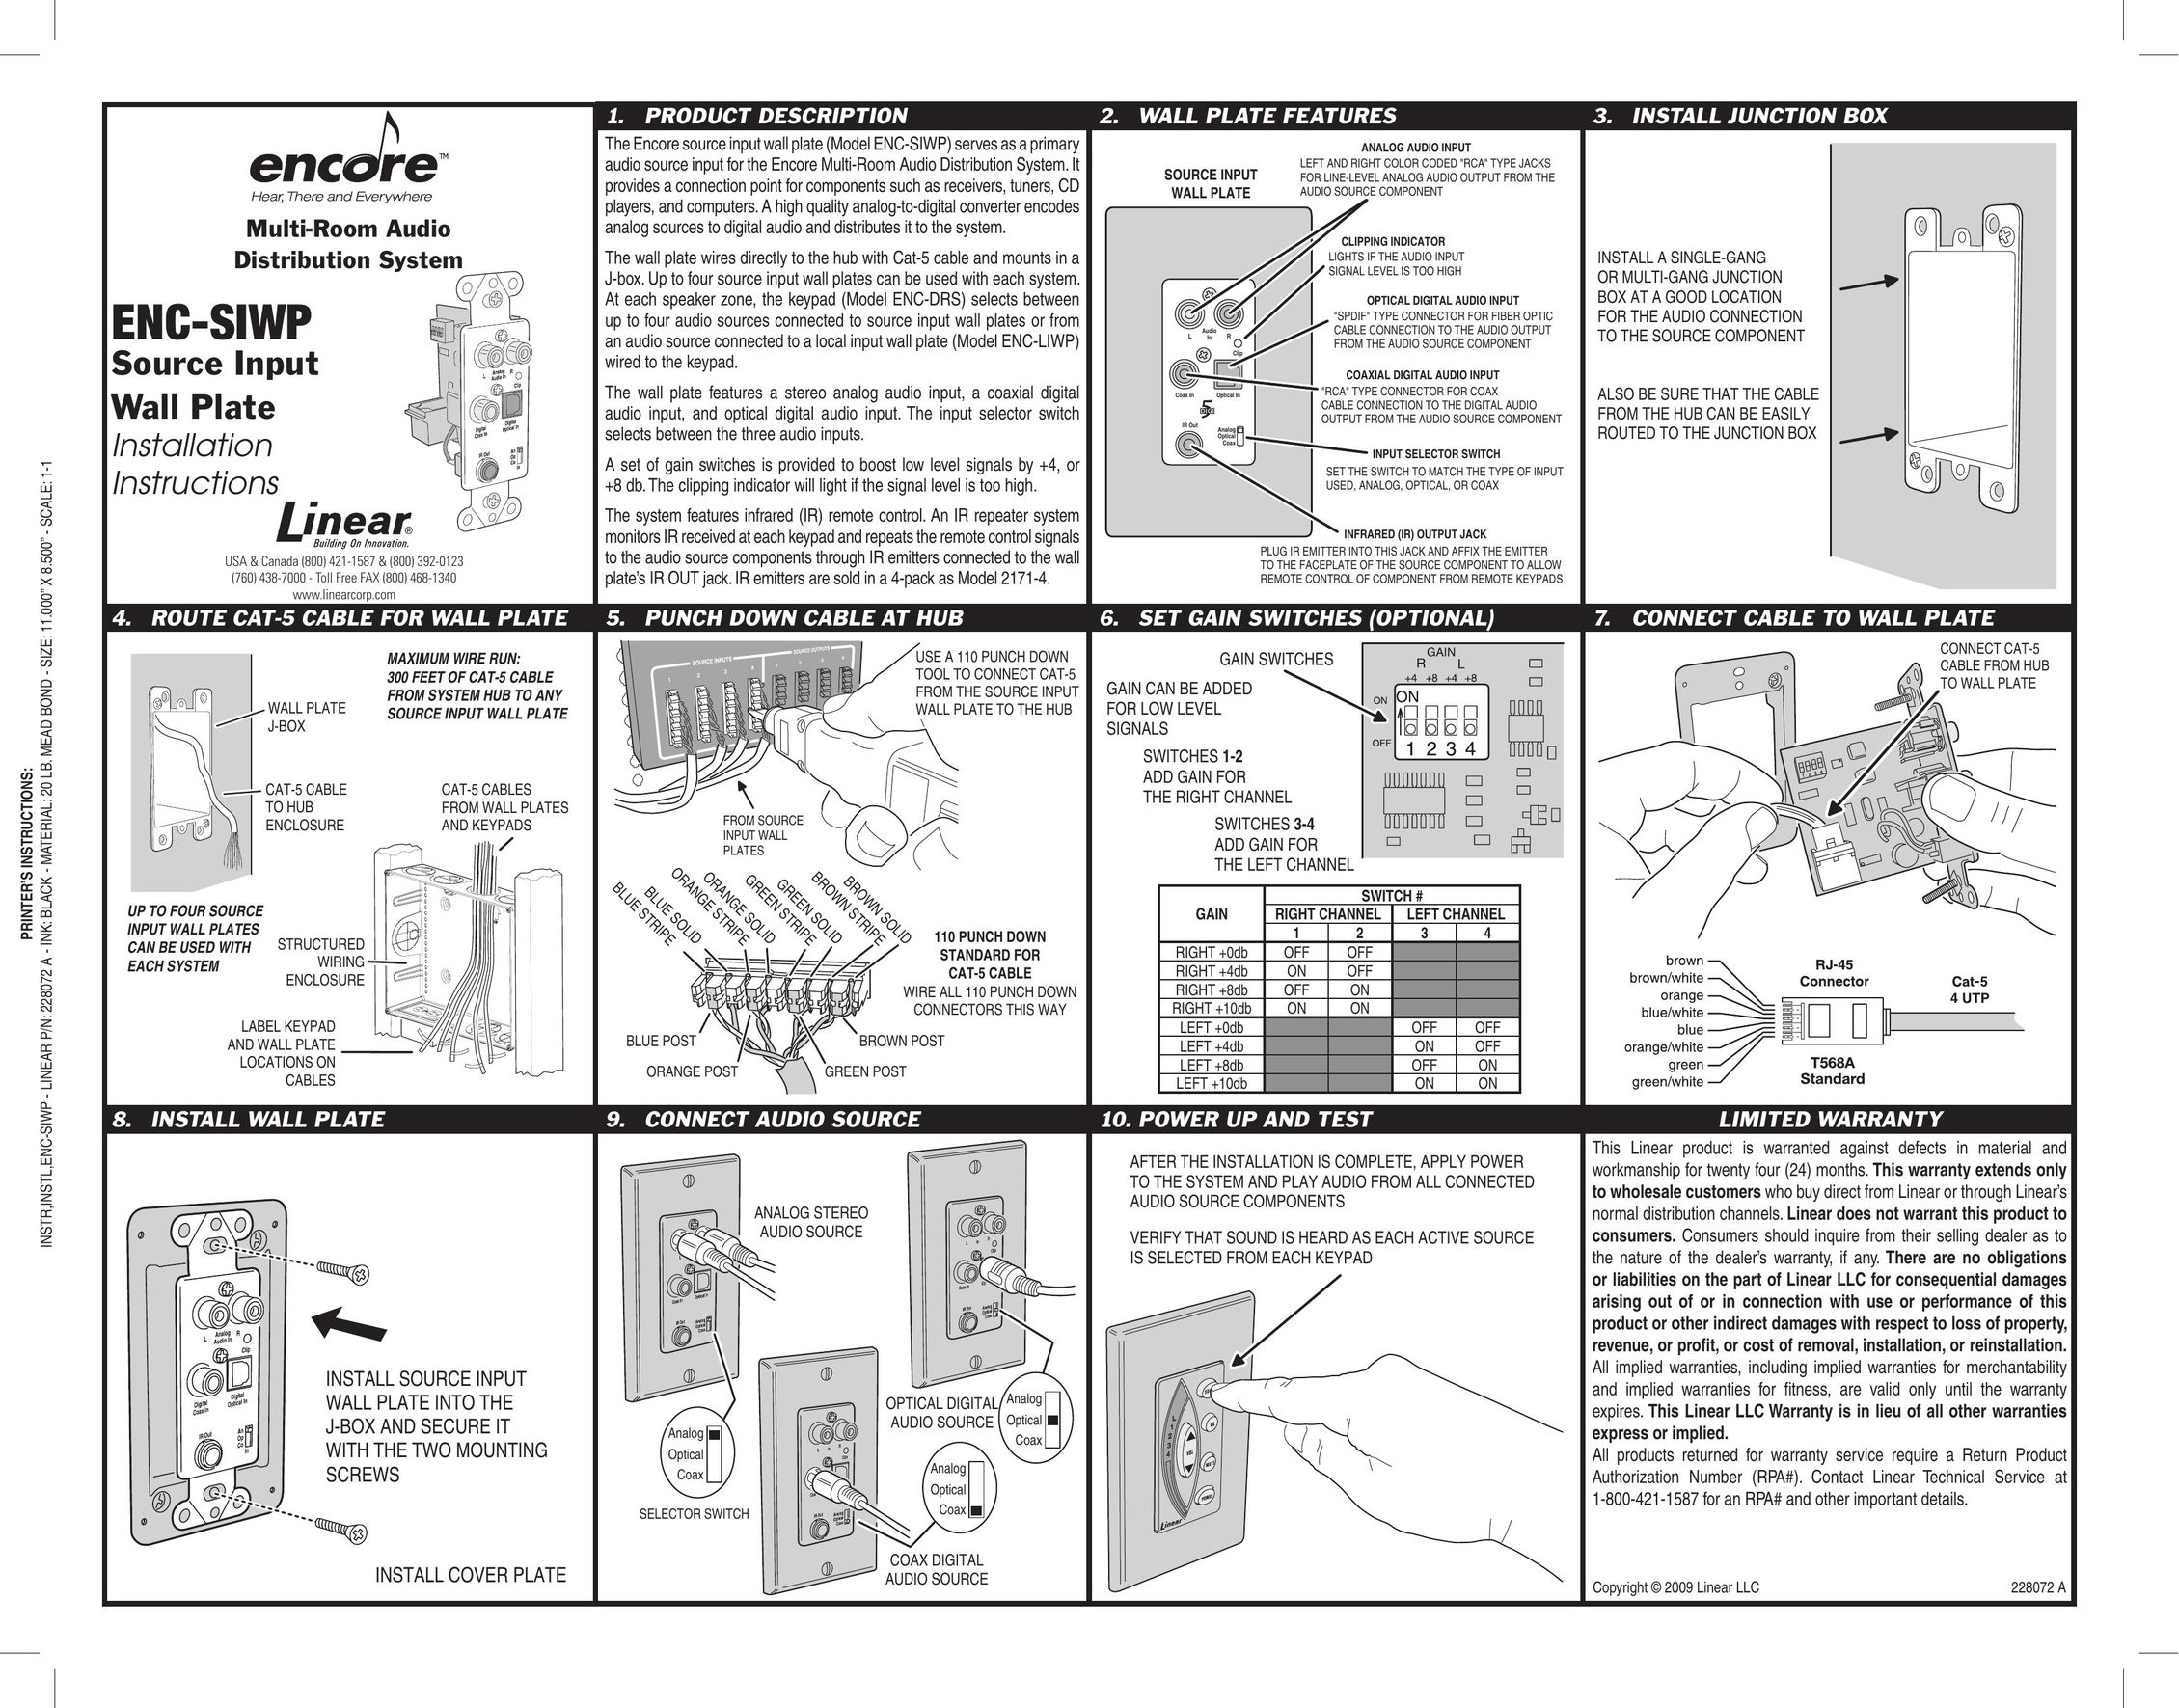 Encore electronic ENC-SIWP Stereo System User Manual